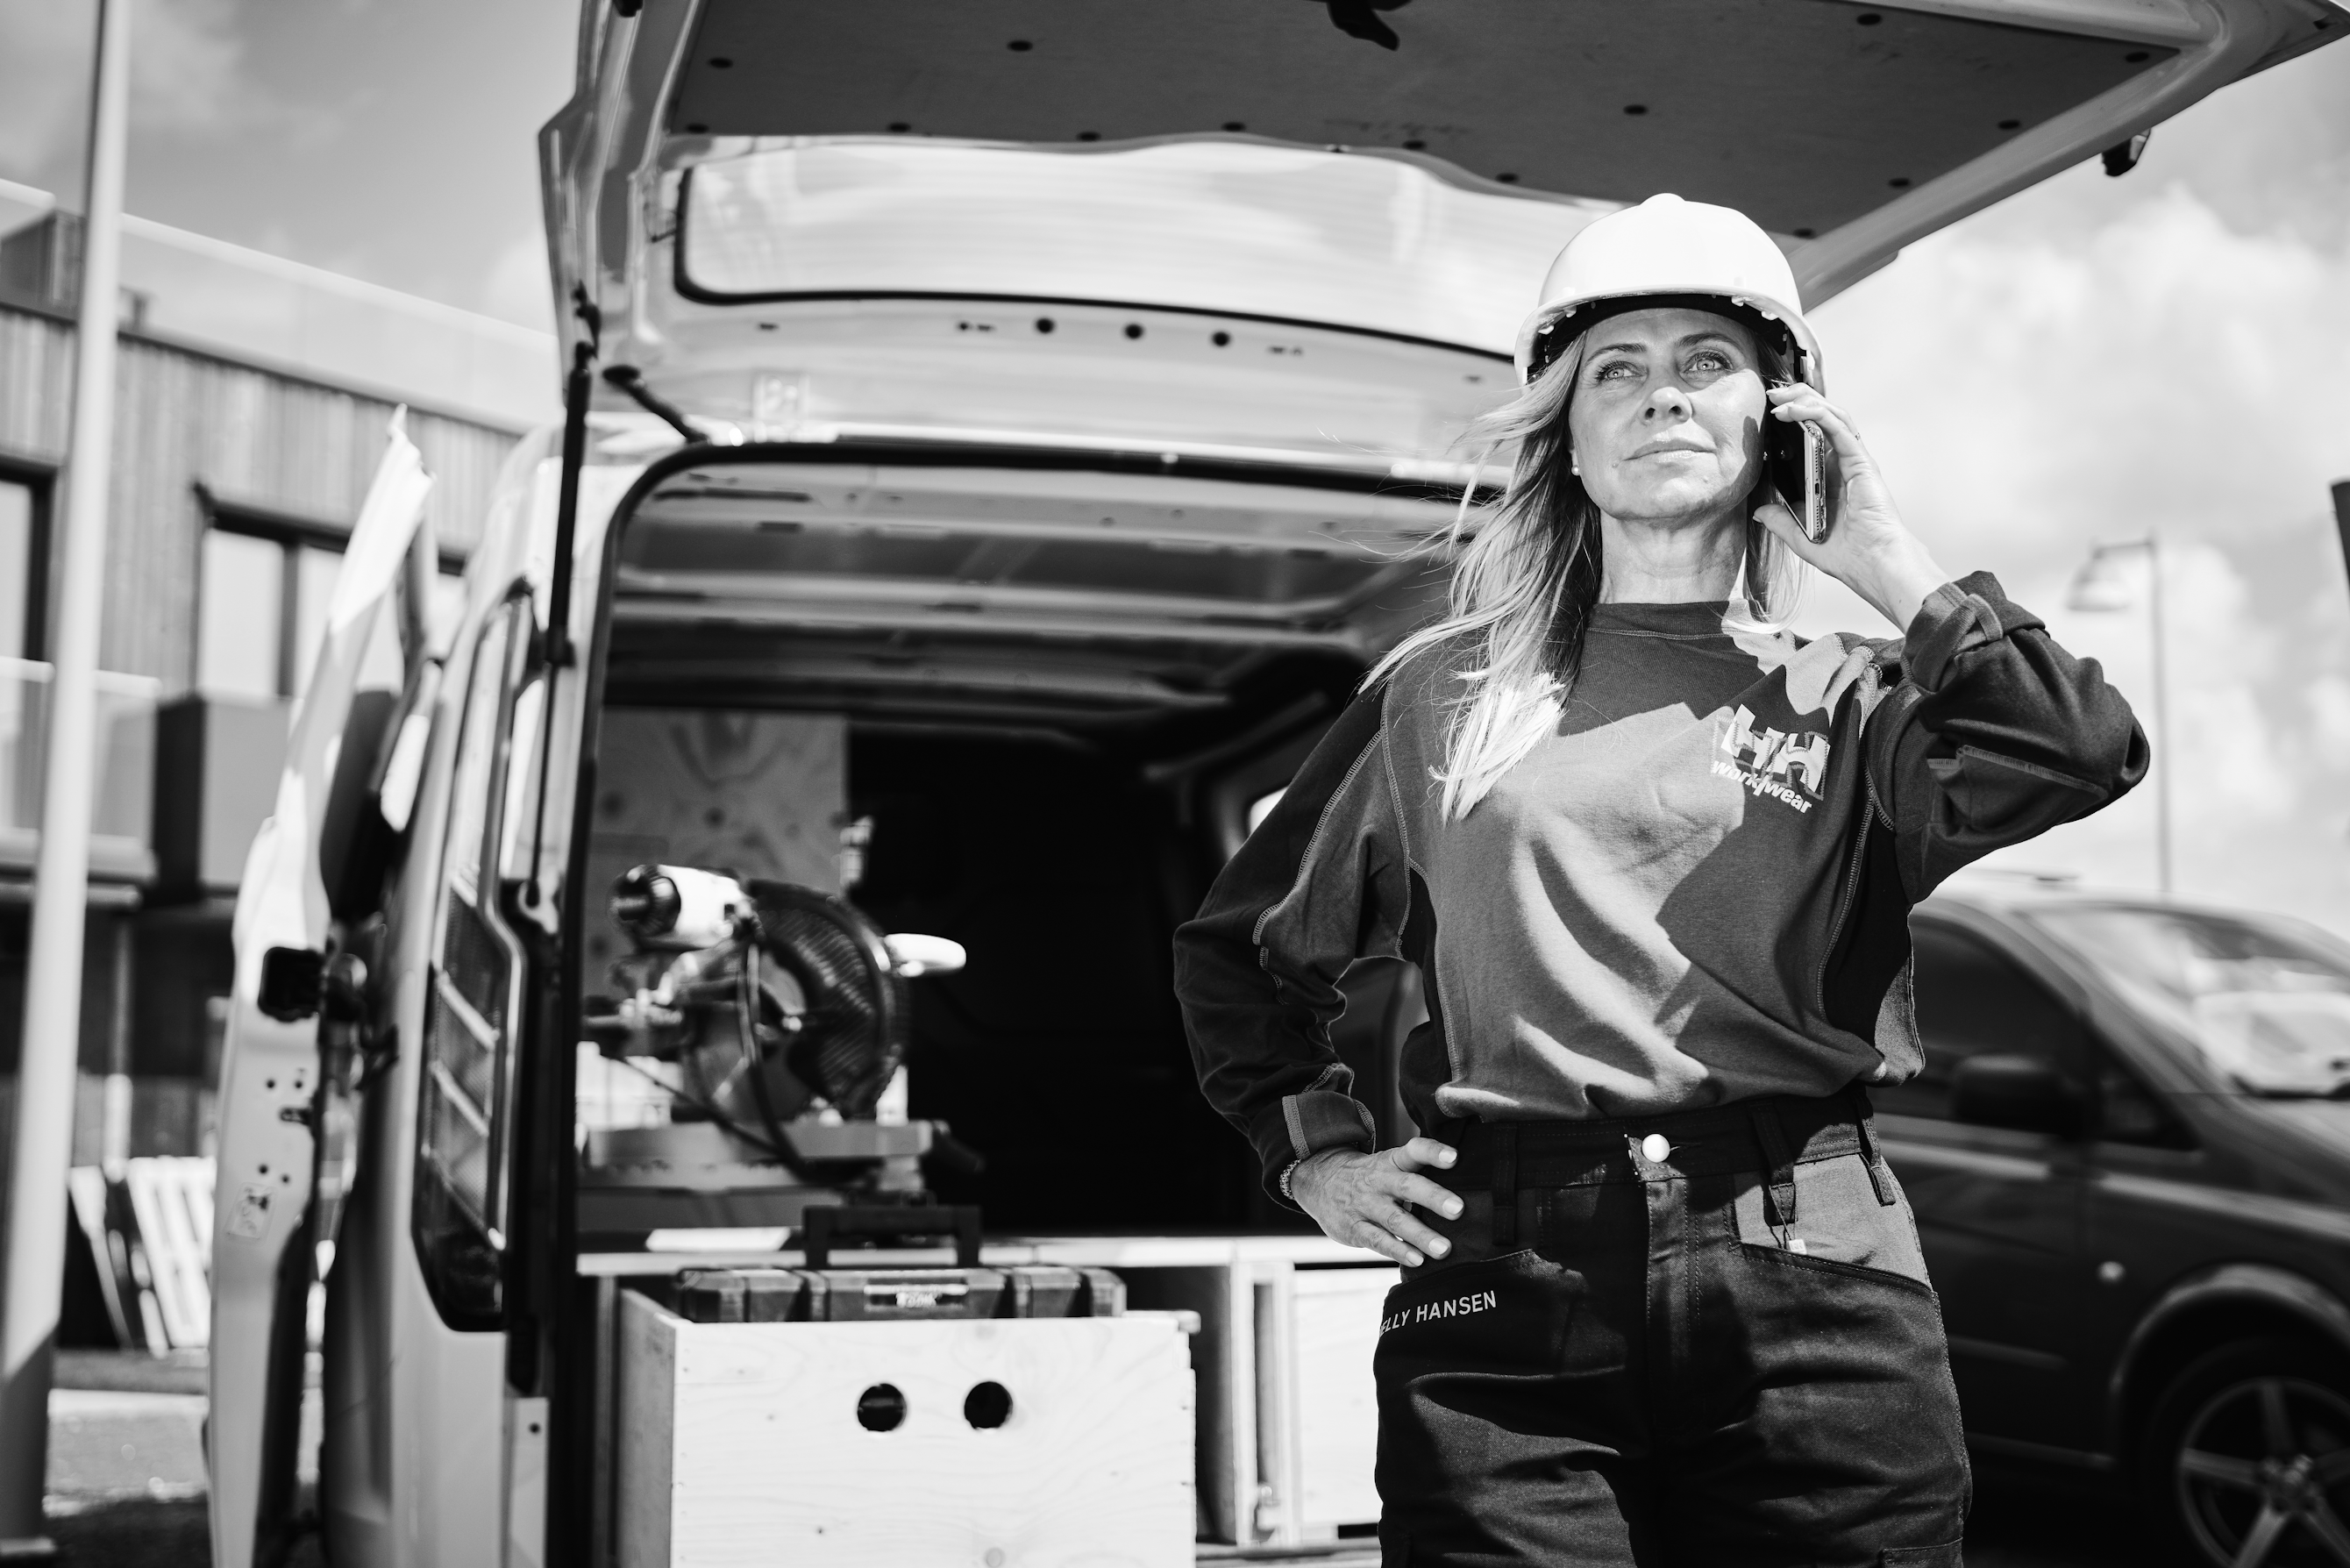 Worker woman talking on the phone in front of a van black and white